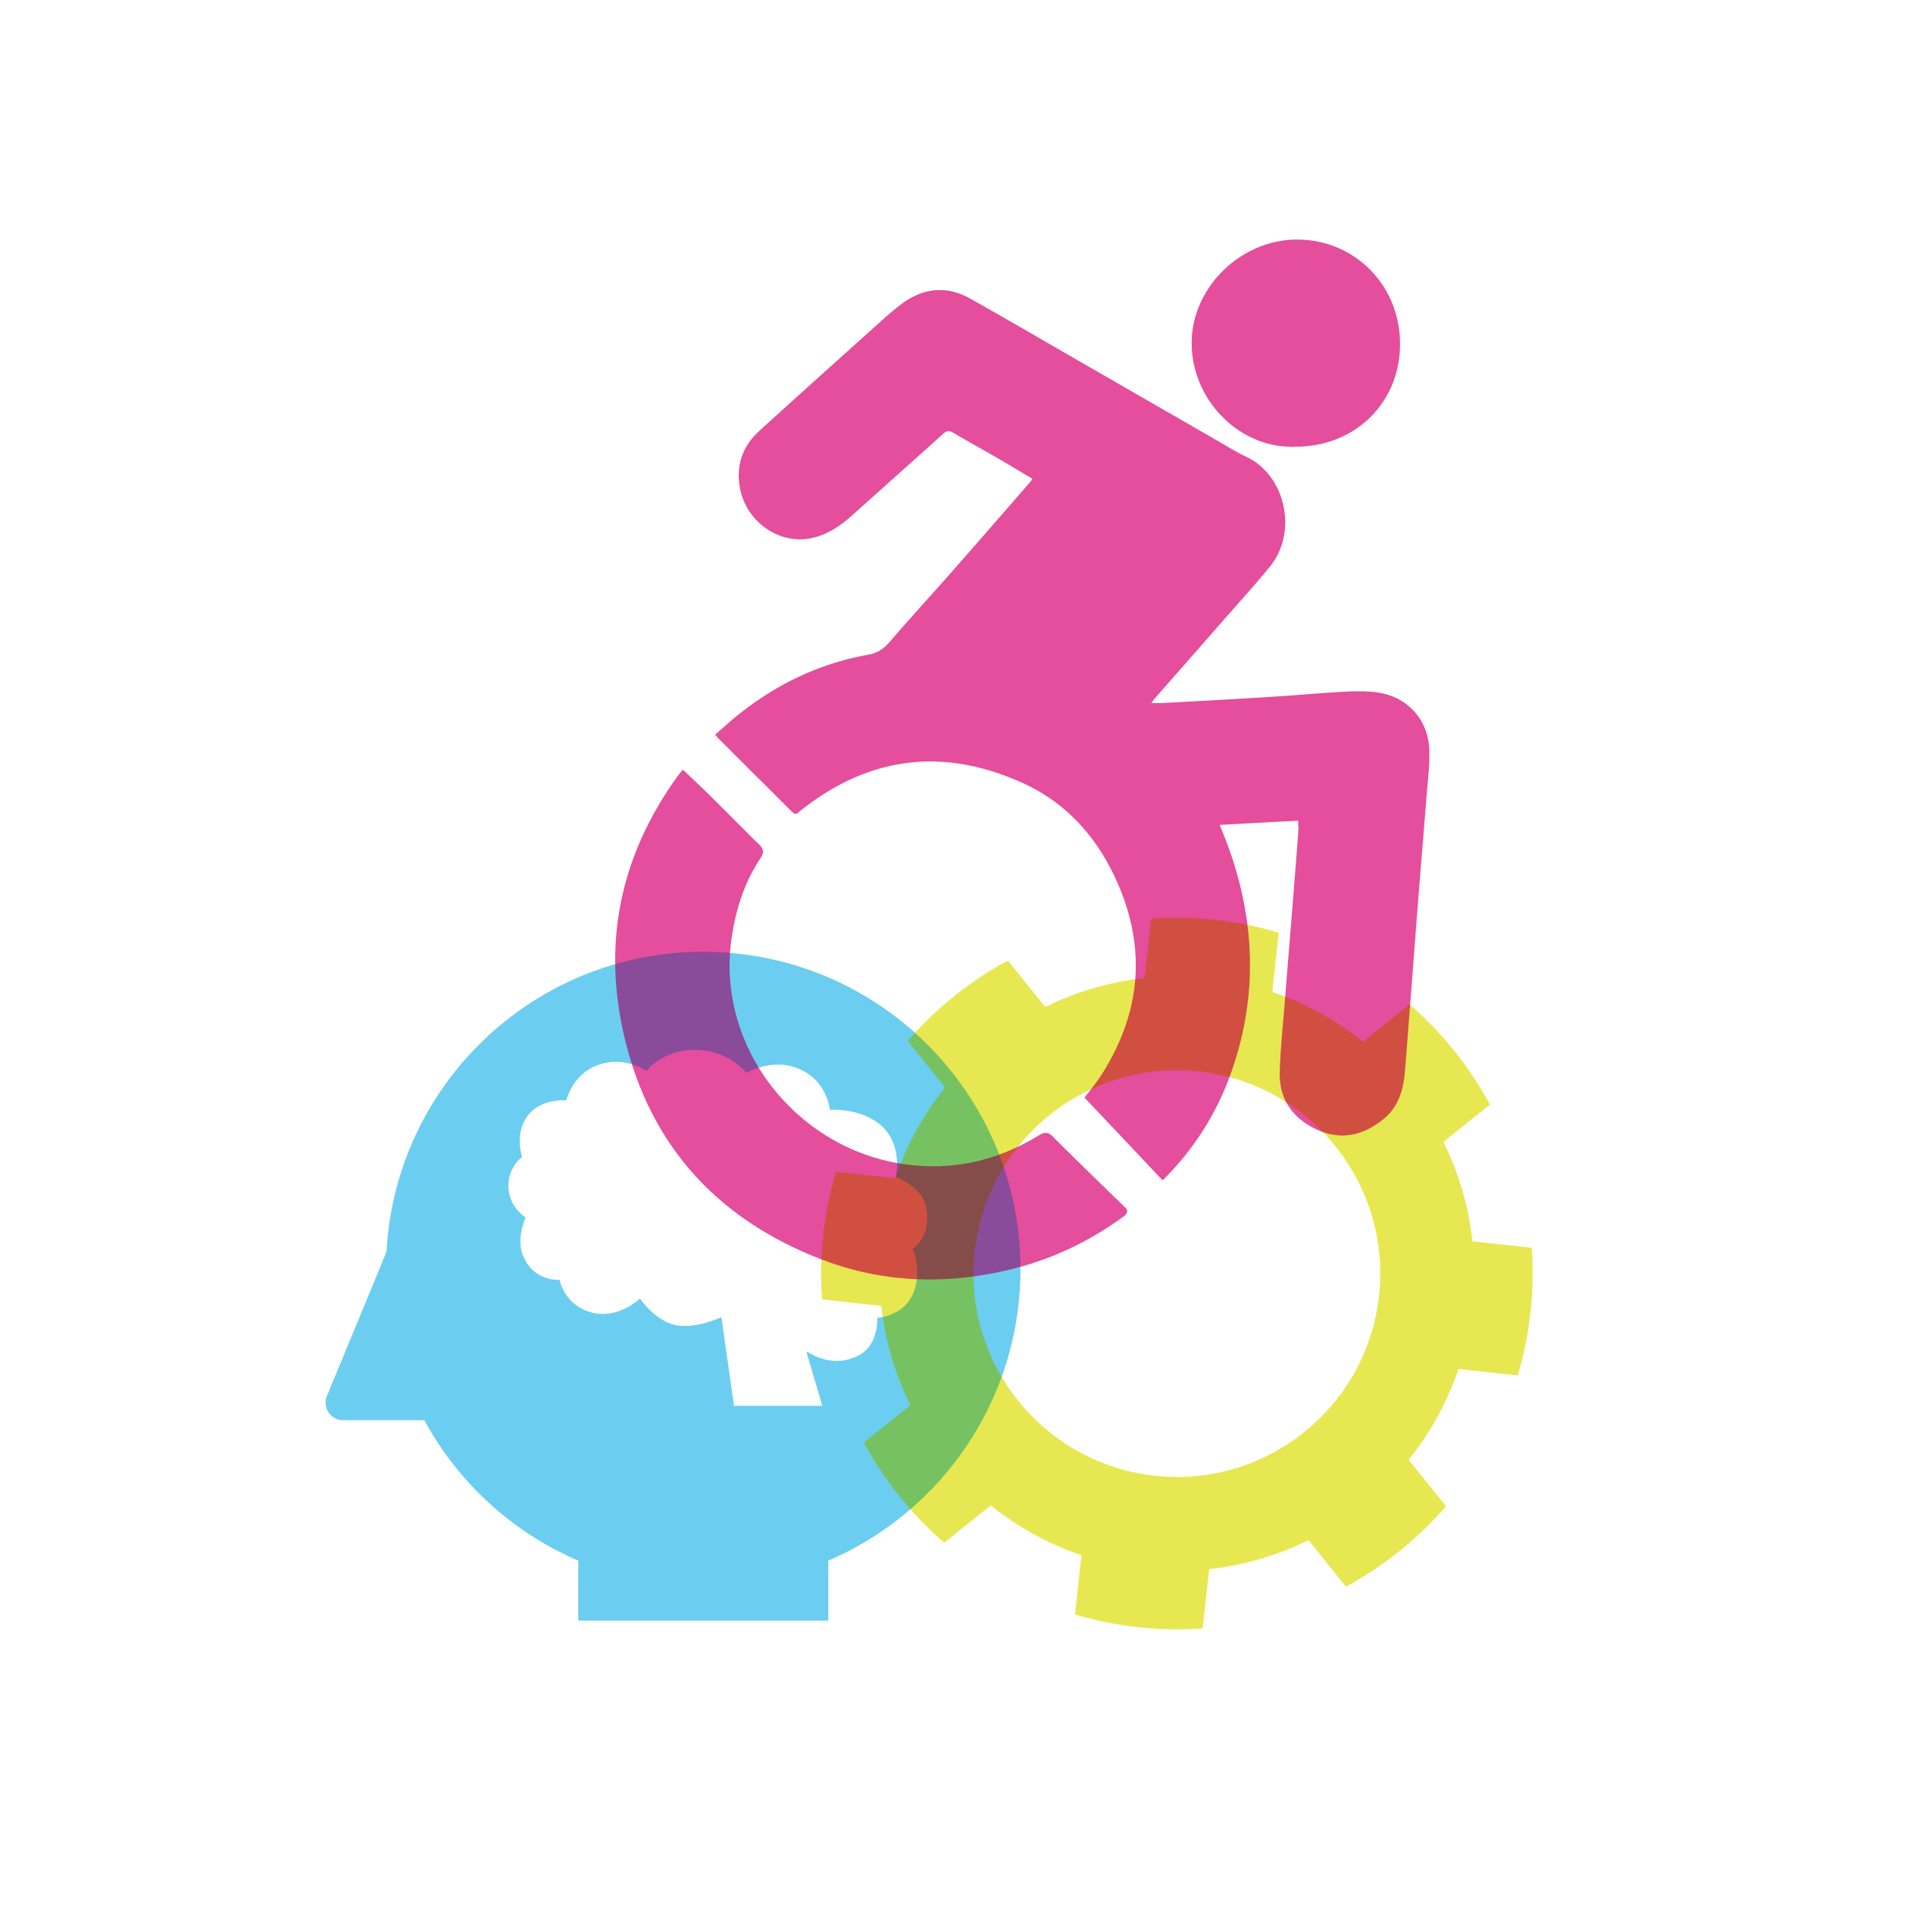 Image of wheelchair, person and gear icons